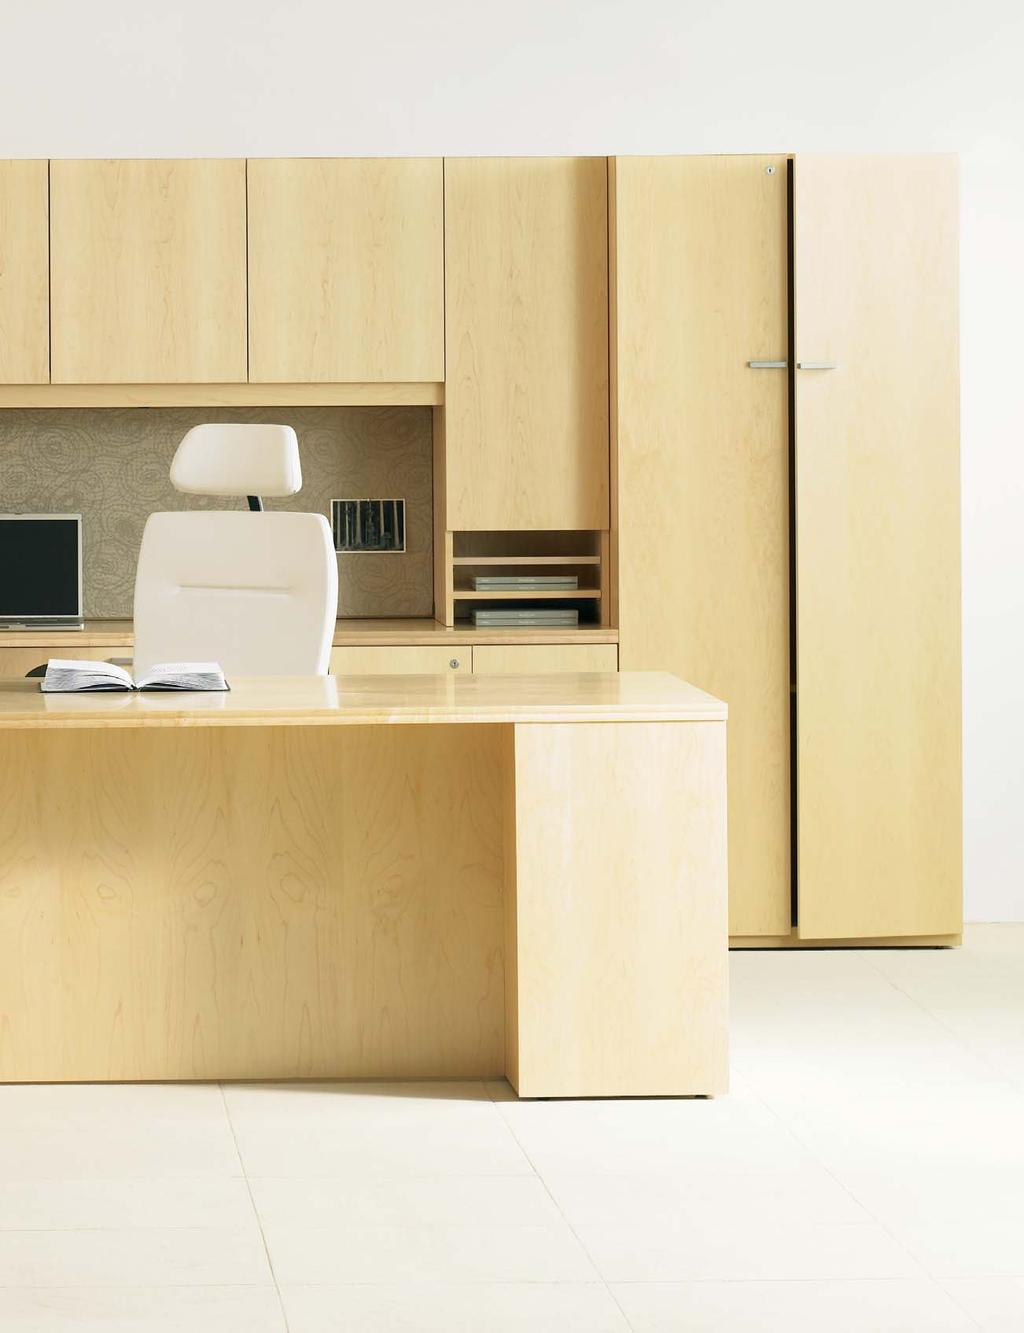 desired office configurations throughout the workspace, migrating from conventional planning meeting rooms Control the precise degree of visual and Wood finished surfaces enrich the ambiance of the